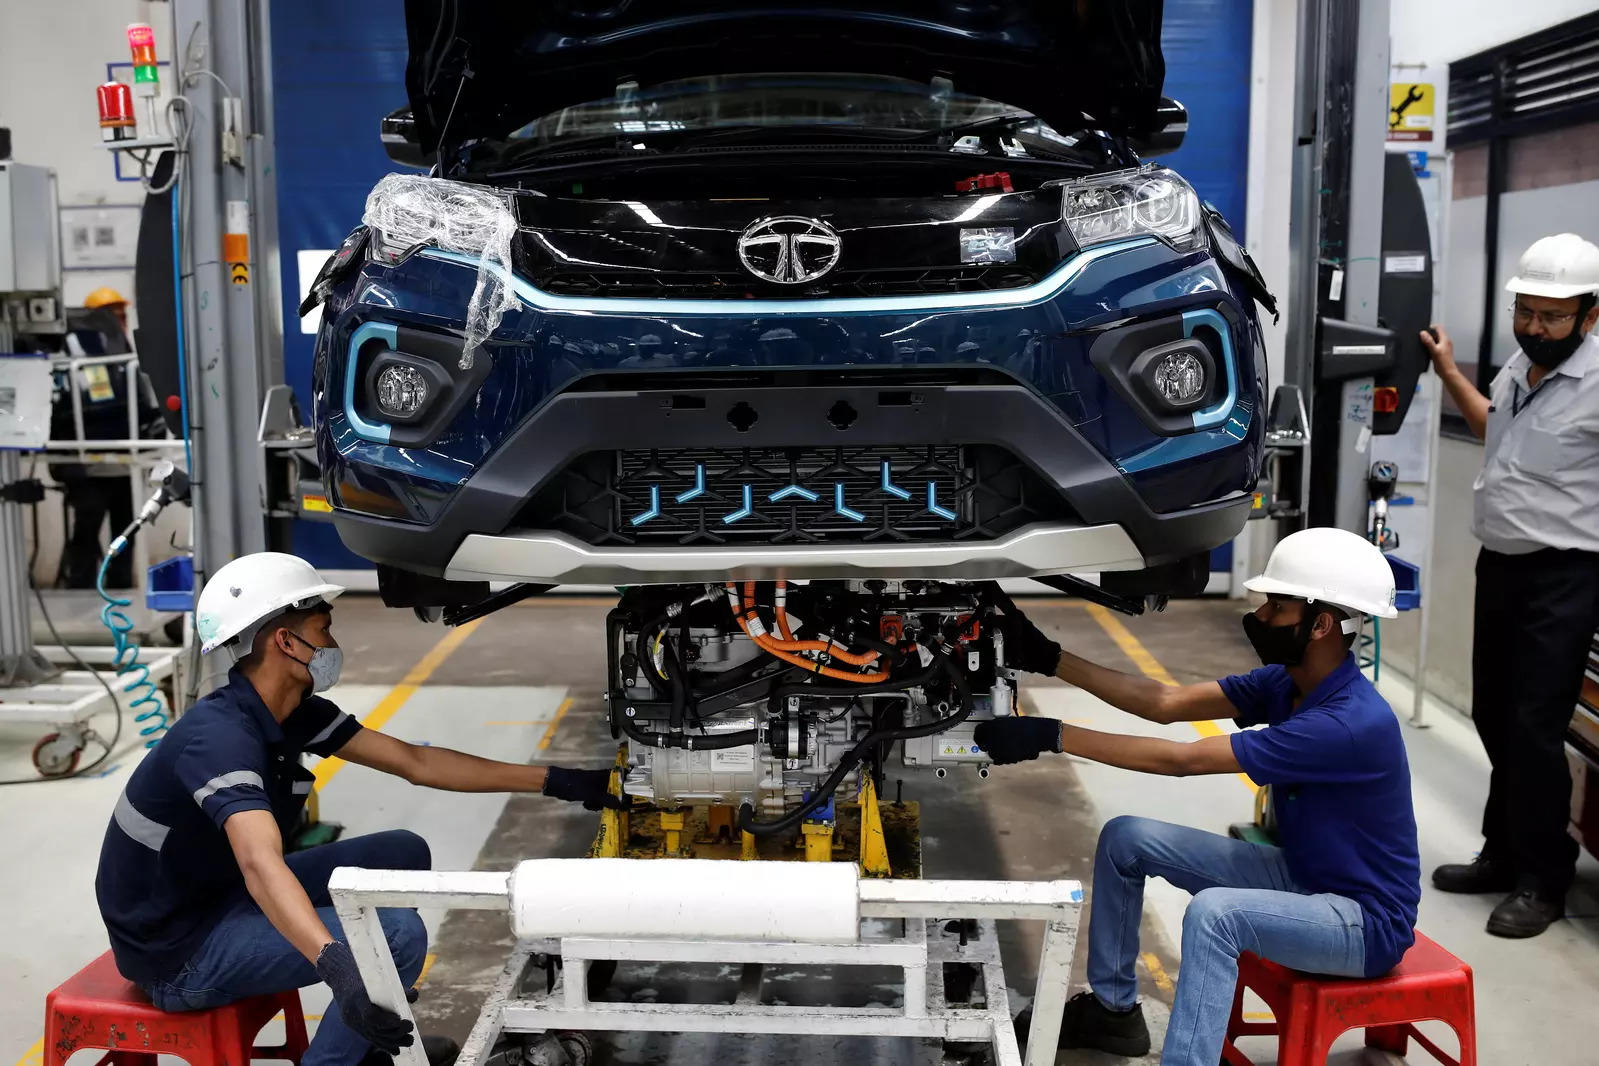  Workers install the electric motor inside a Tata Nexon electric sport utility vehicle (SUV) at the Tata Motors plant in Pune, India, April 7, 2022. (Source: Reuters)